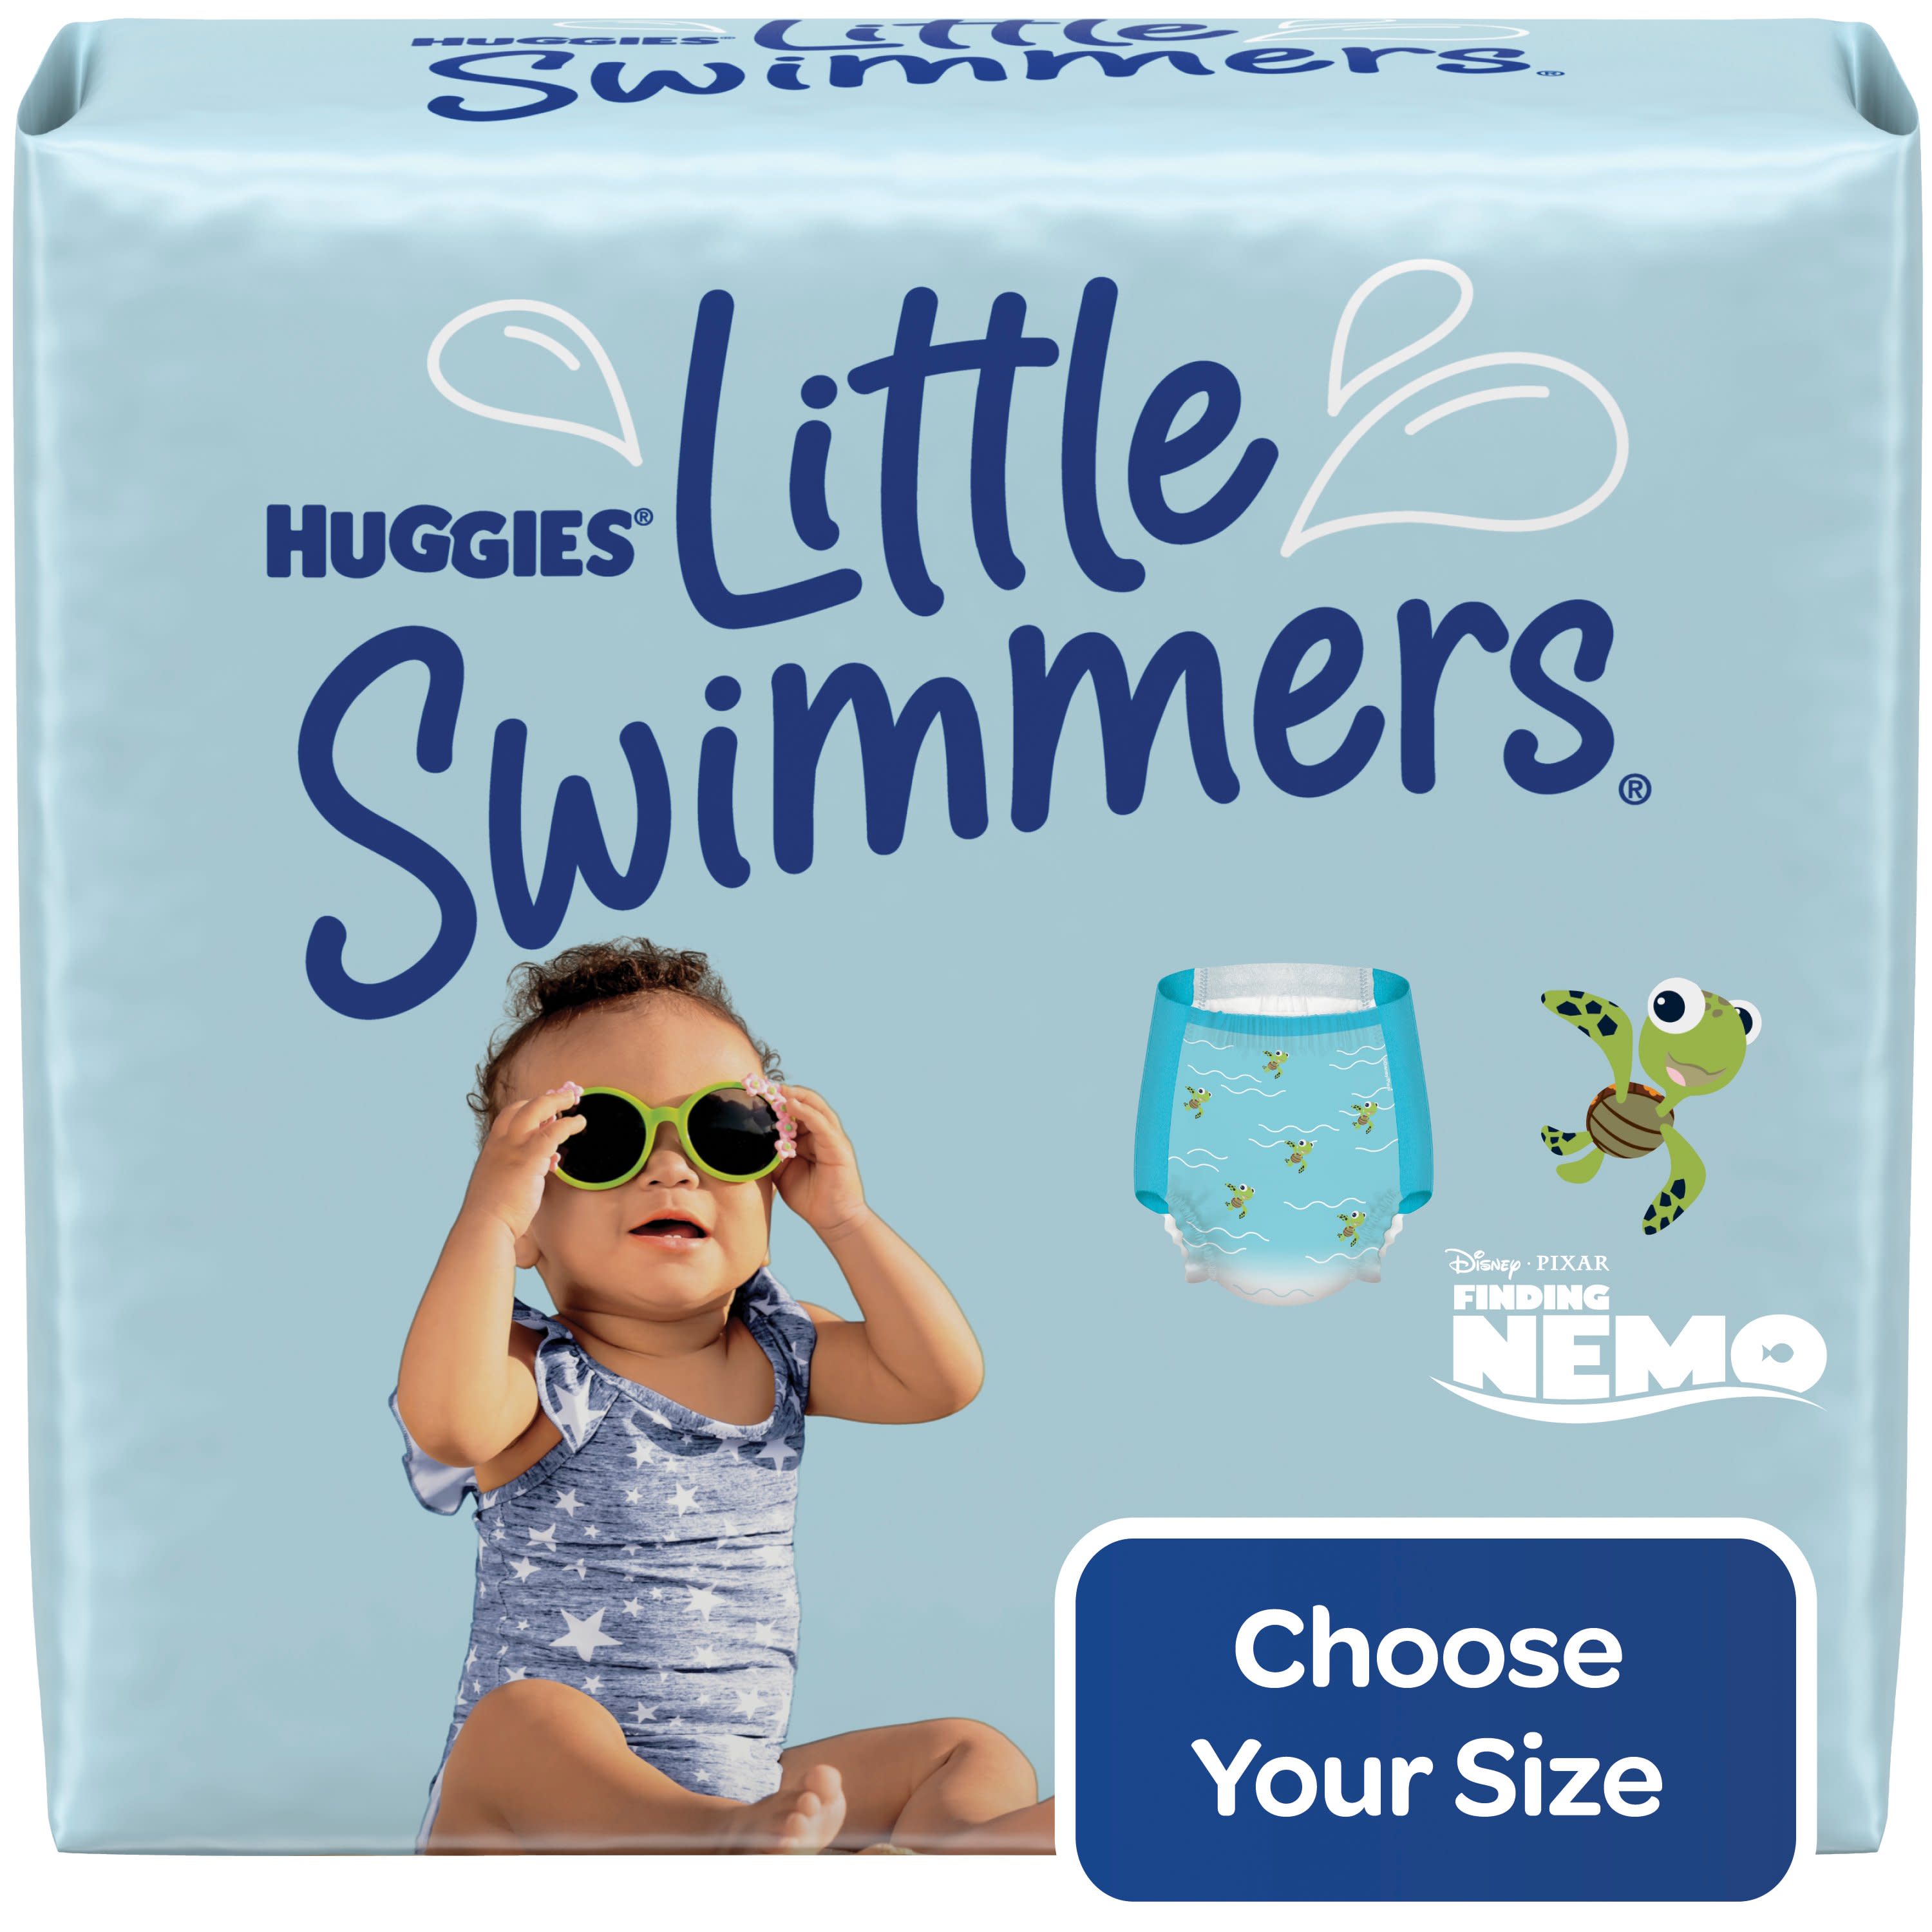 Huggies Little Swimmers Swim Diapers, Size 3, 20 Ct - image 1 of 11